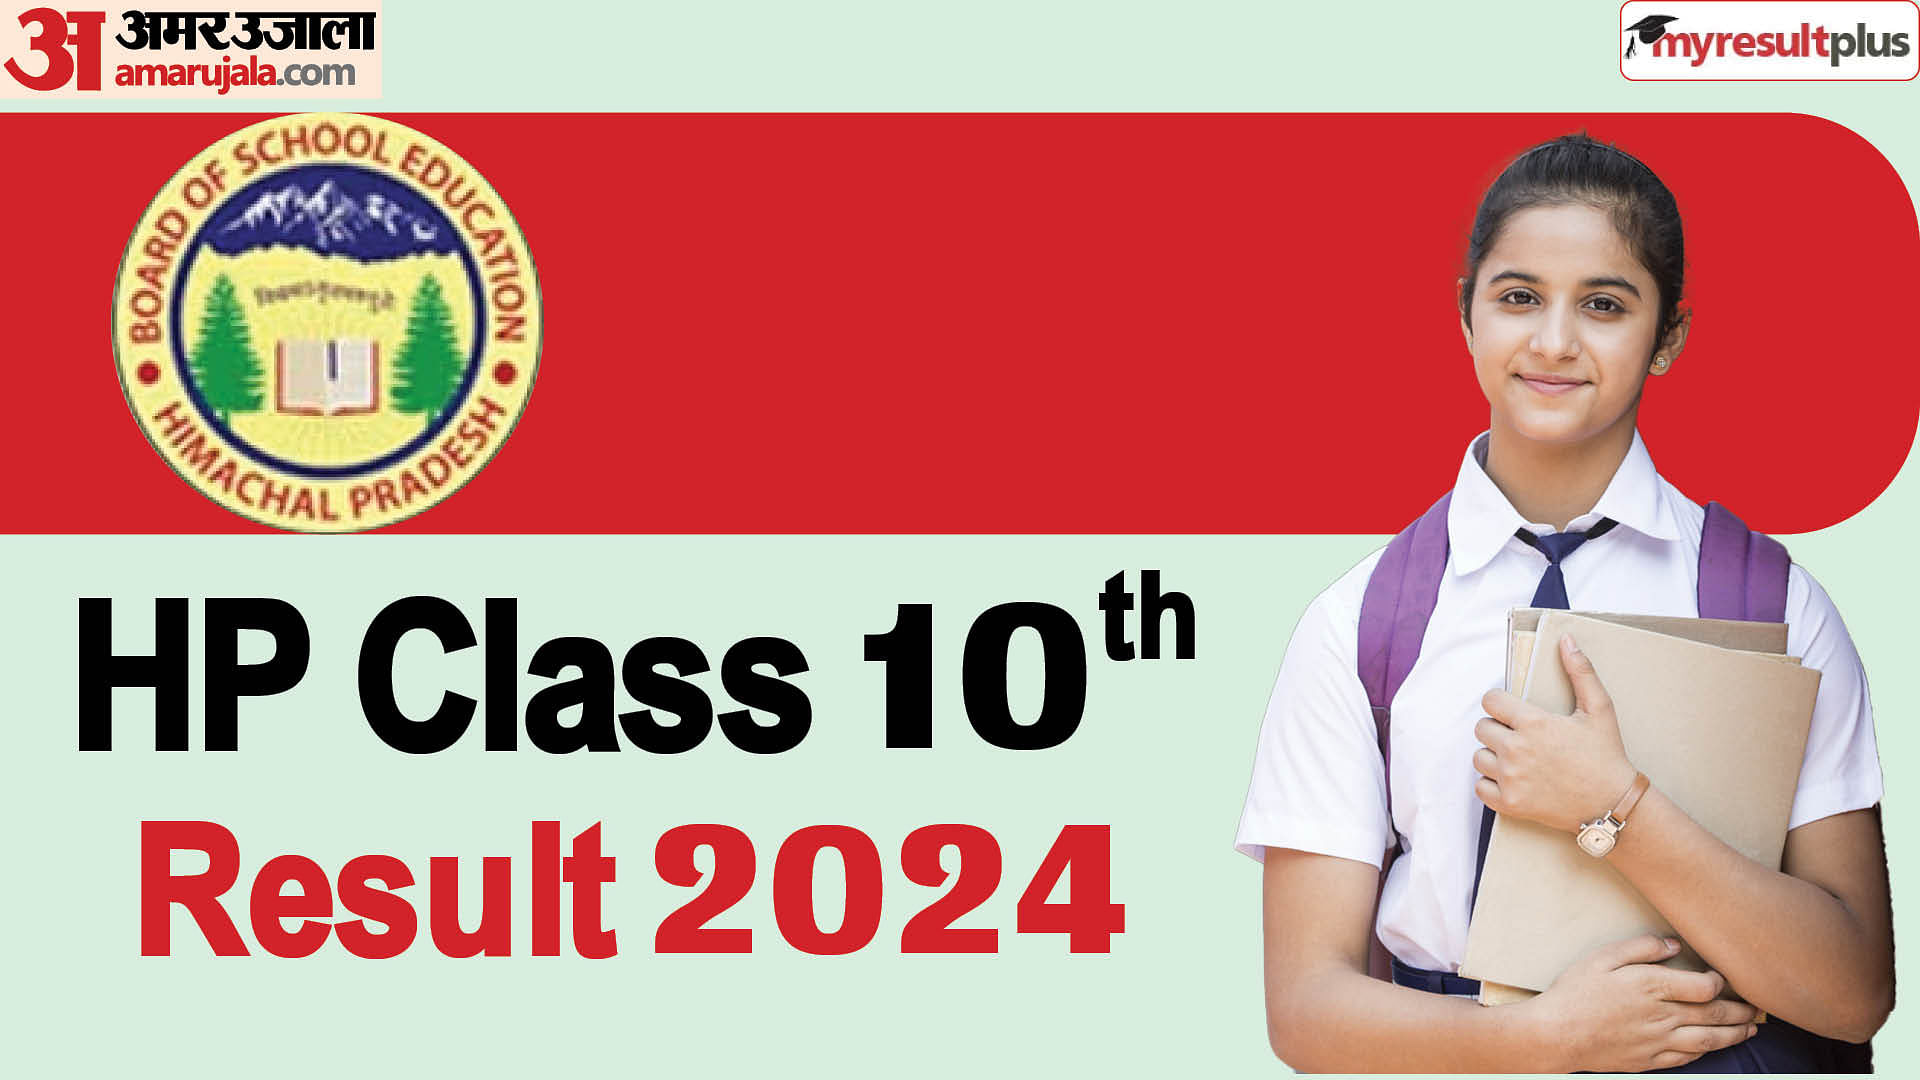 HP 10th Result 2024 declared: Check pass percentage and toppers name, Read all details here